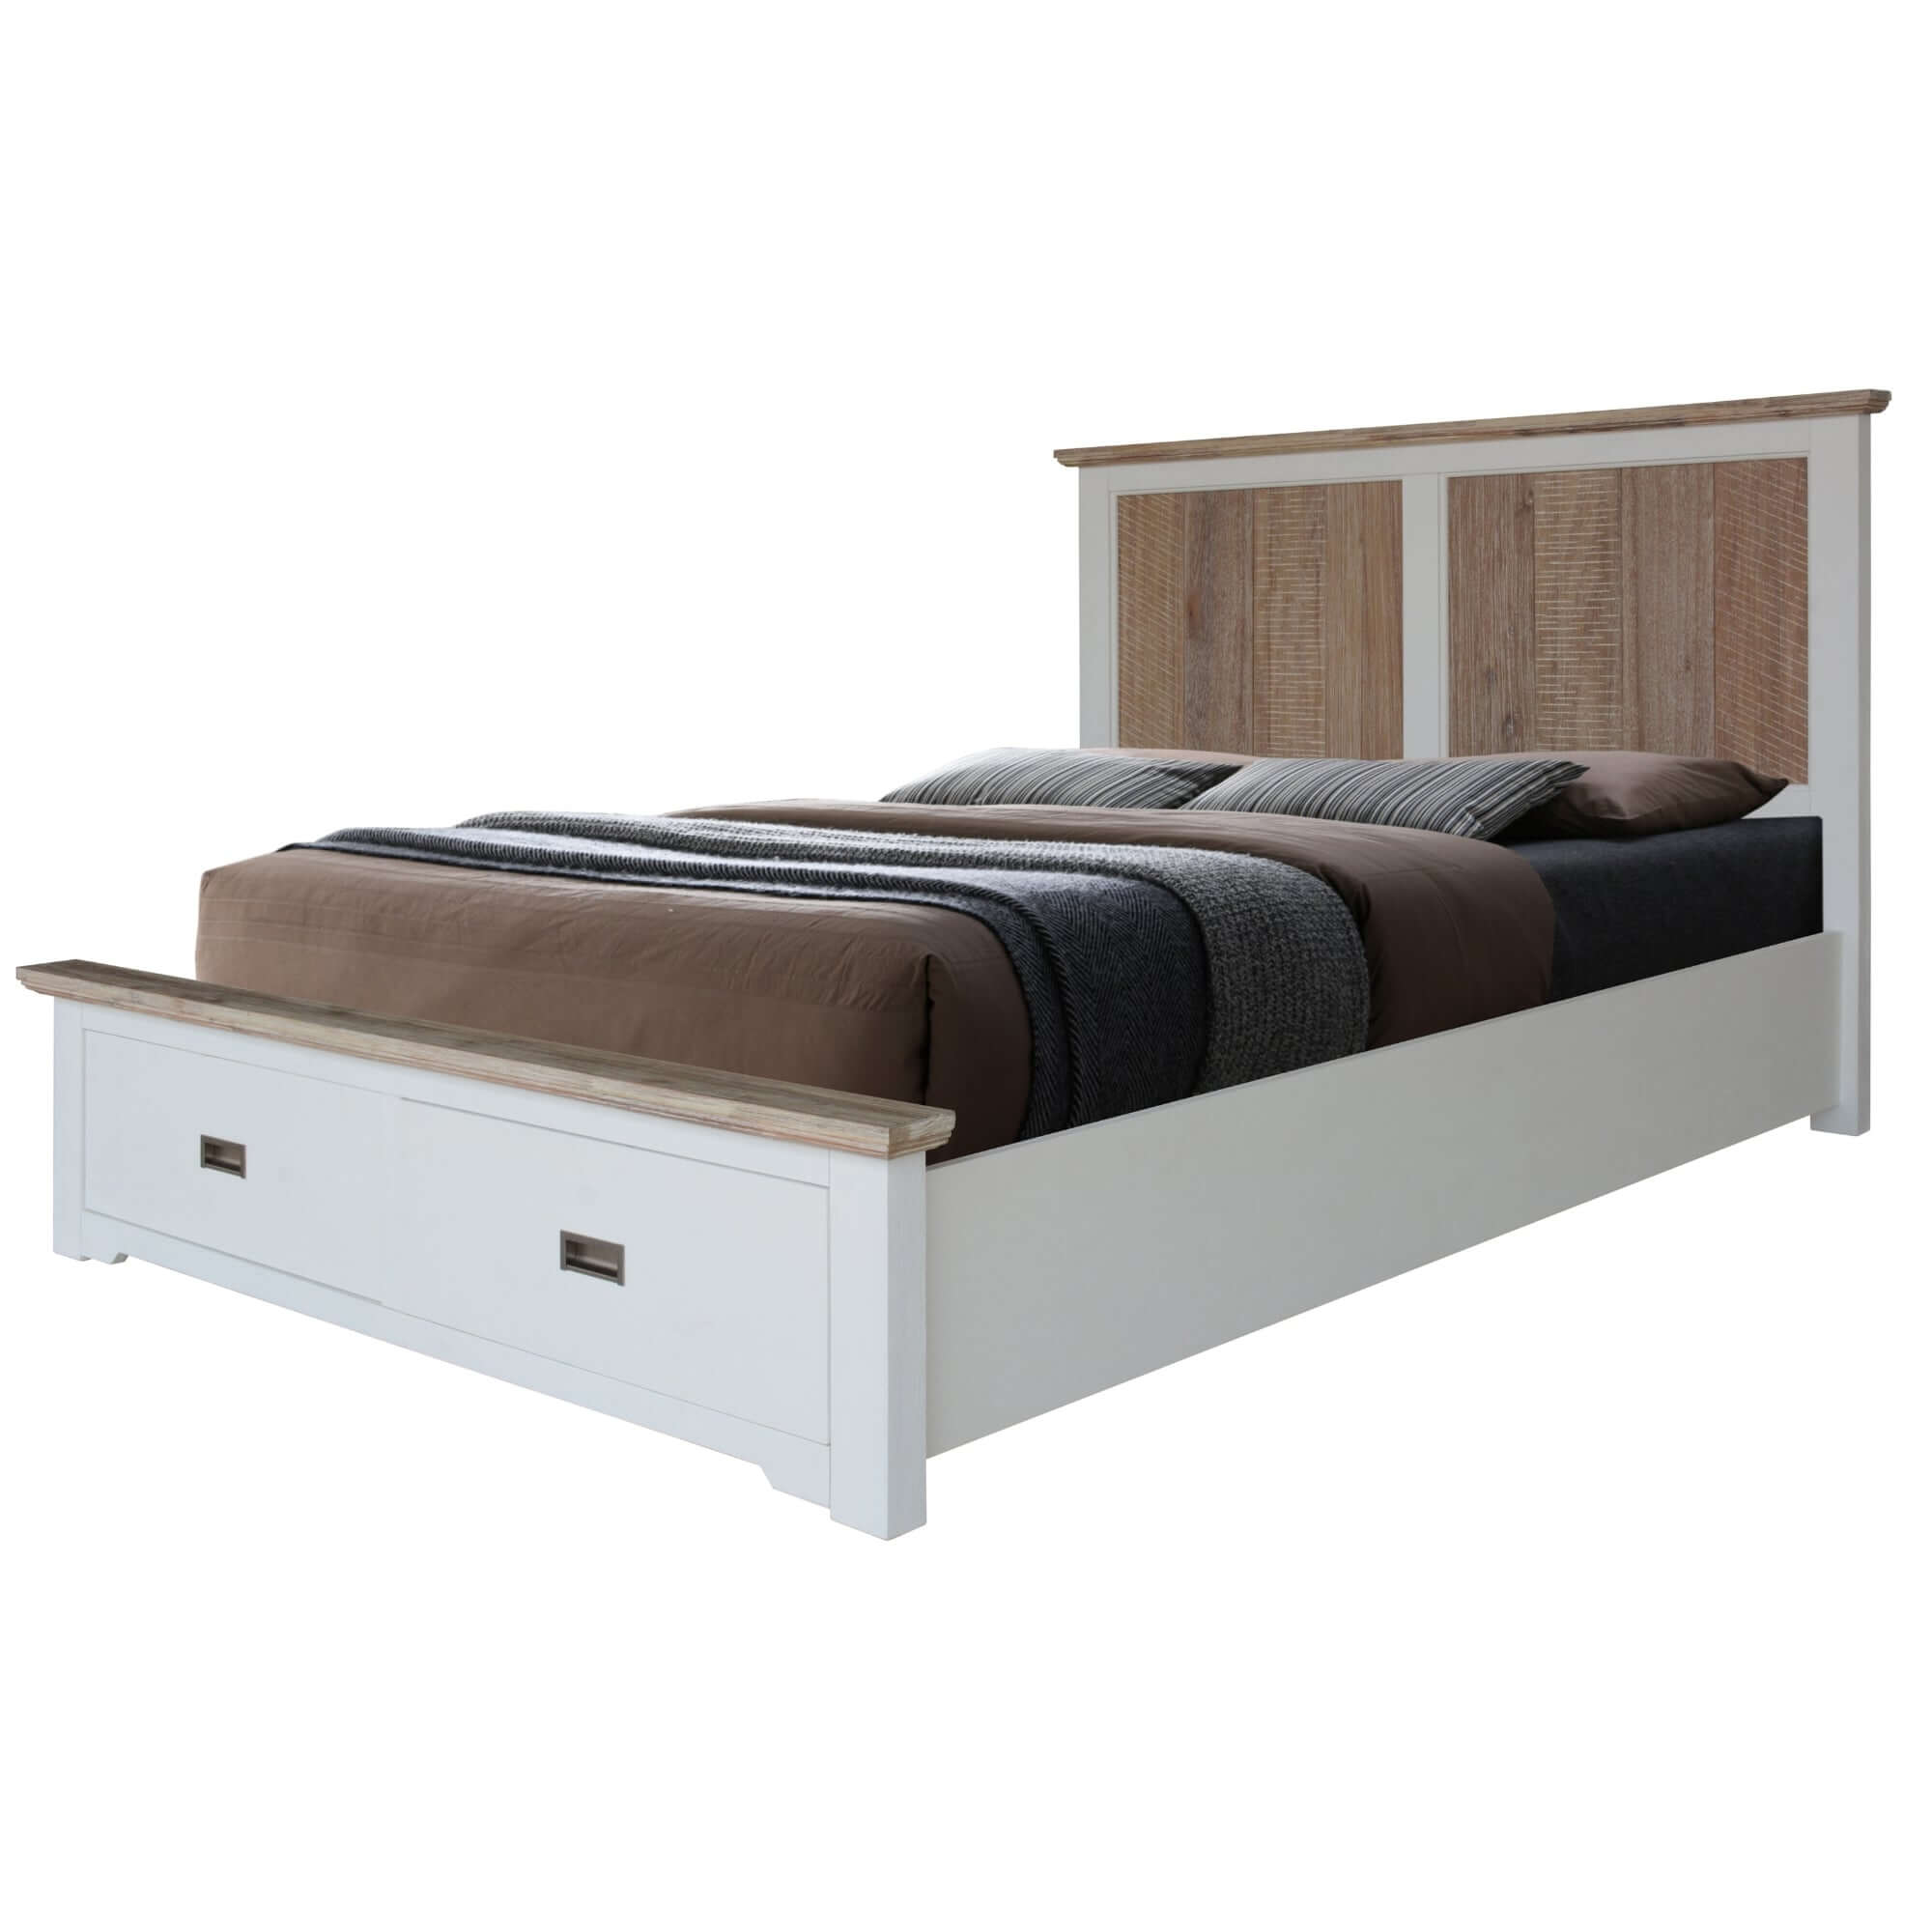 King Size Fiona Bed Frame with Storage Drawers-Upinteriors